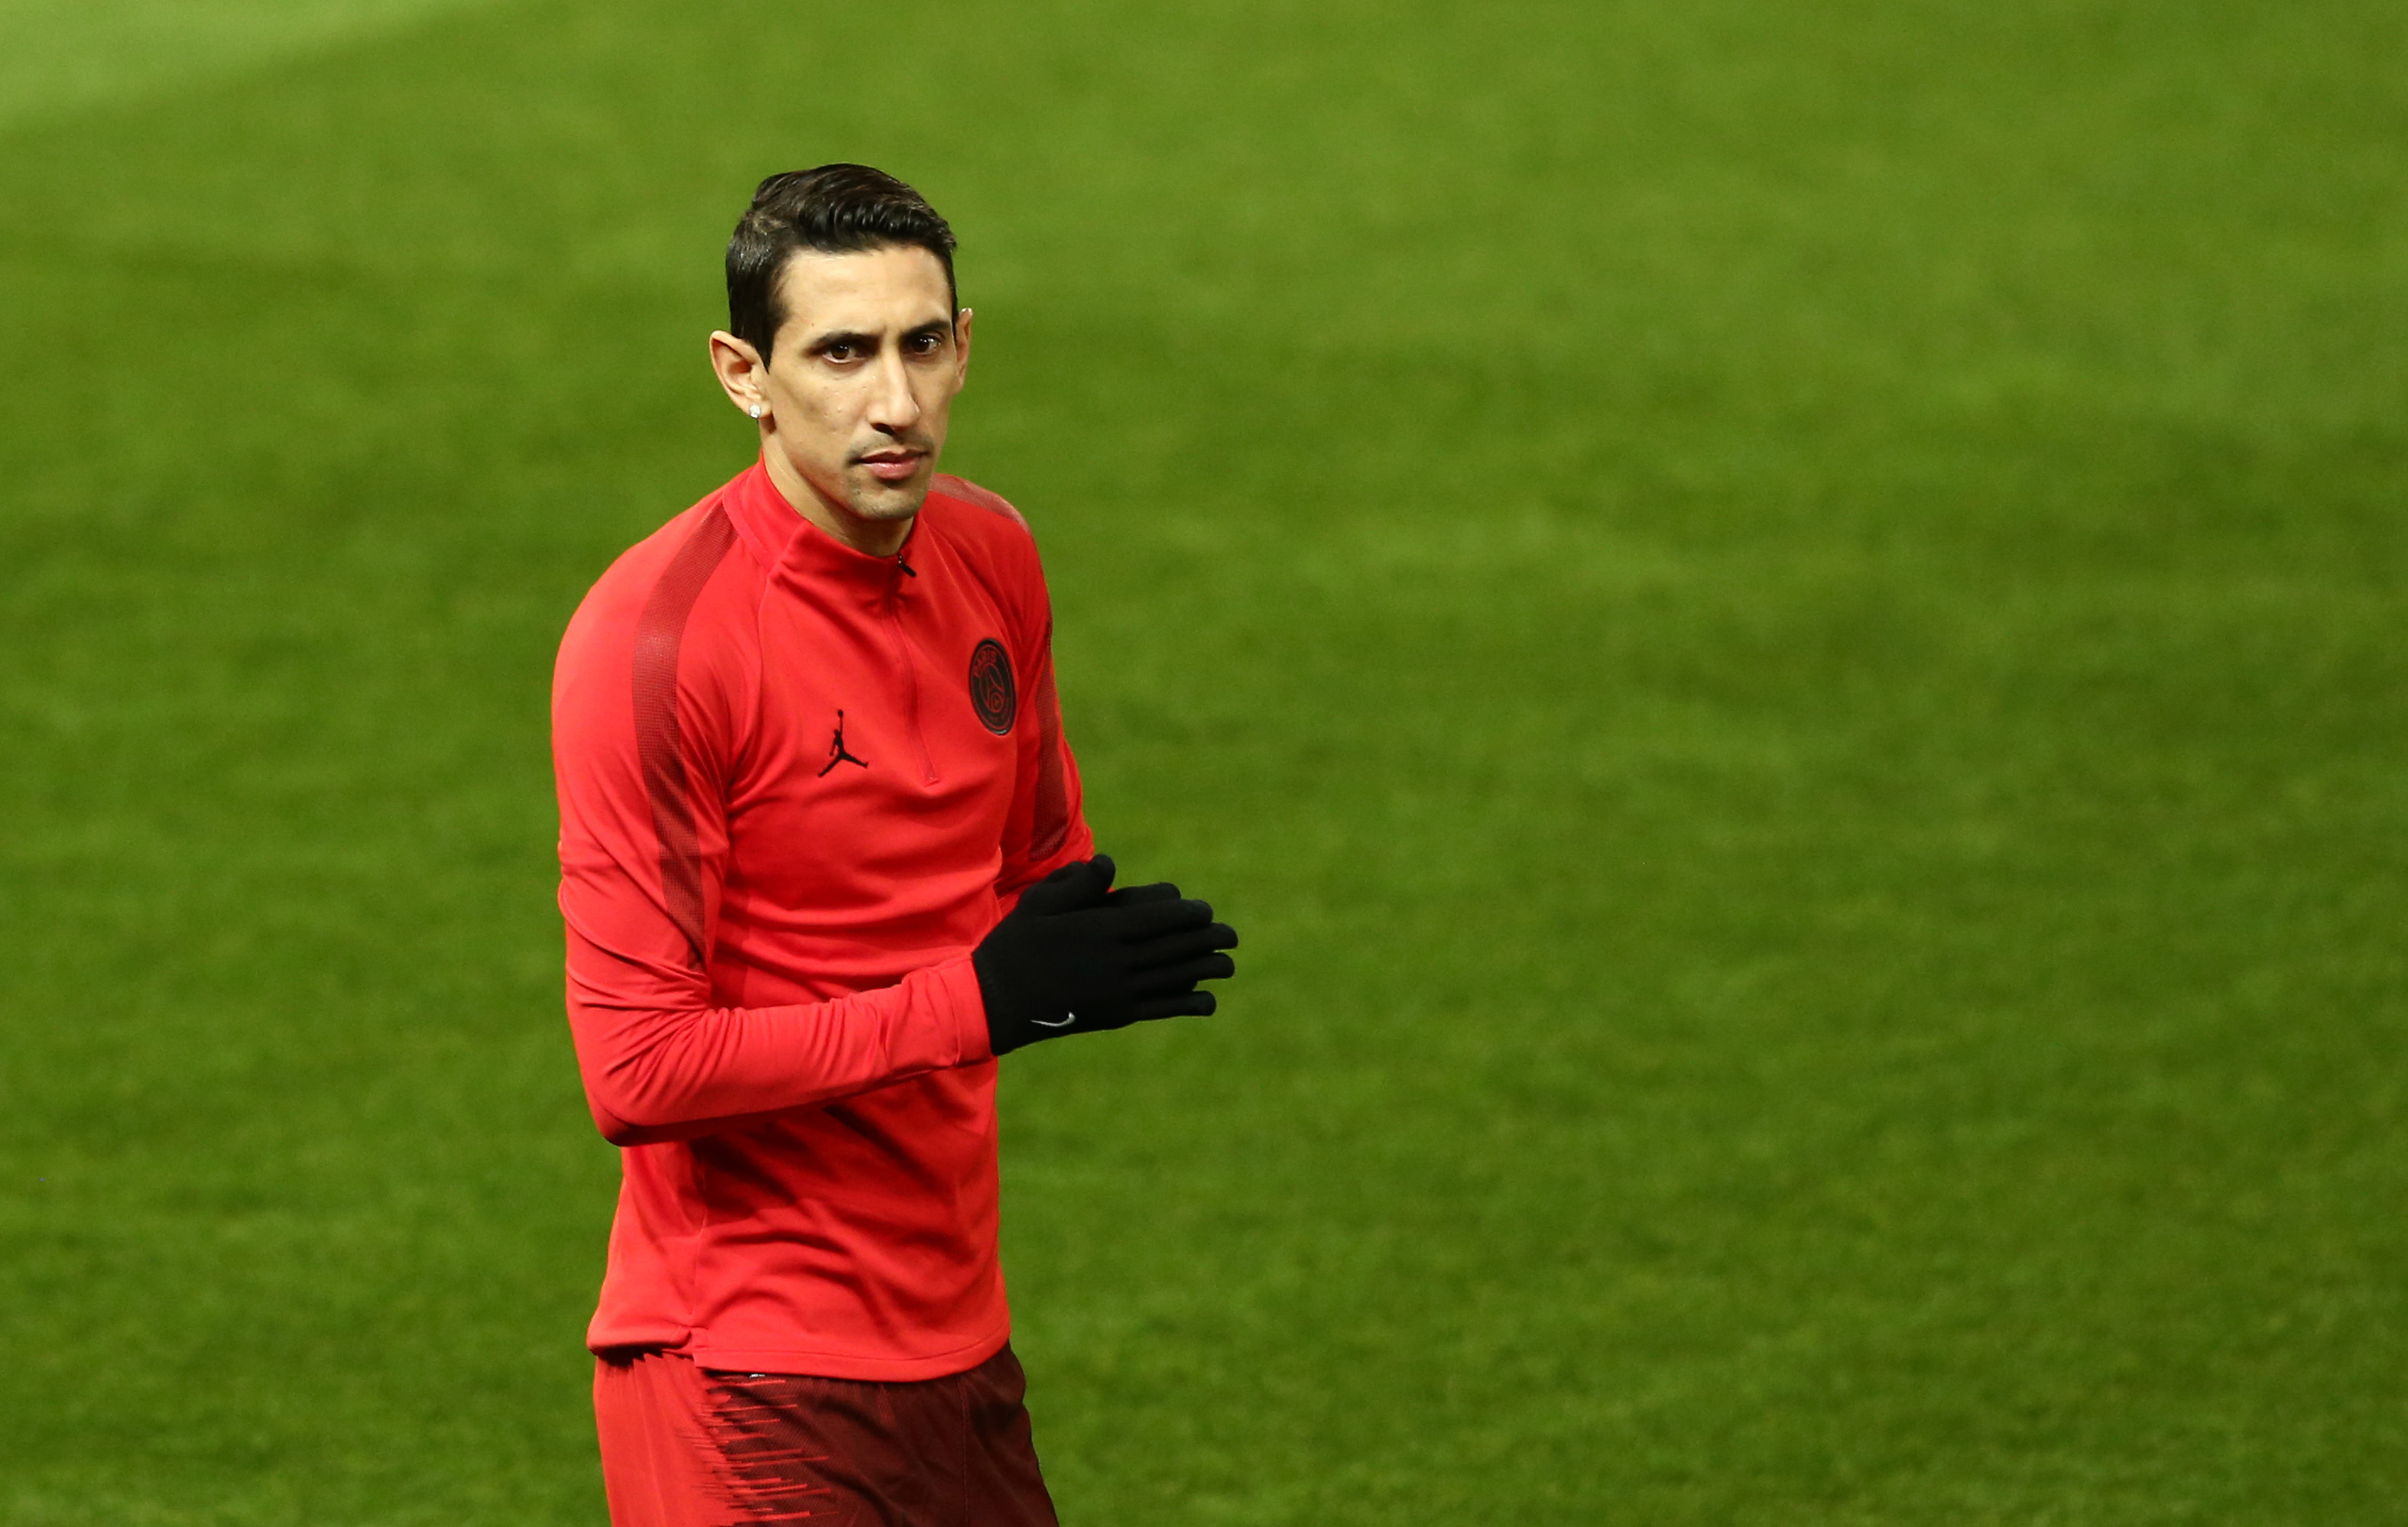 Di Maria has been handed a four-game ban, starting this week. (Photo by Jan Kruger/Getty Images)